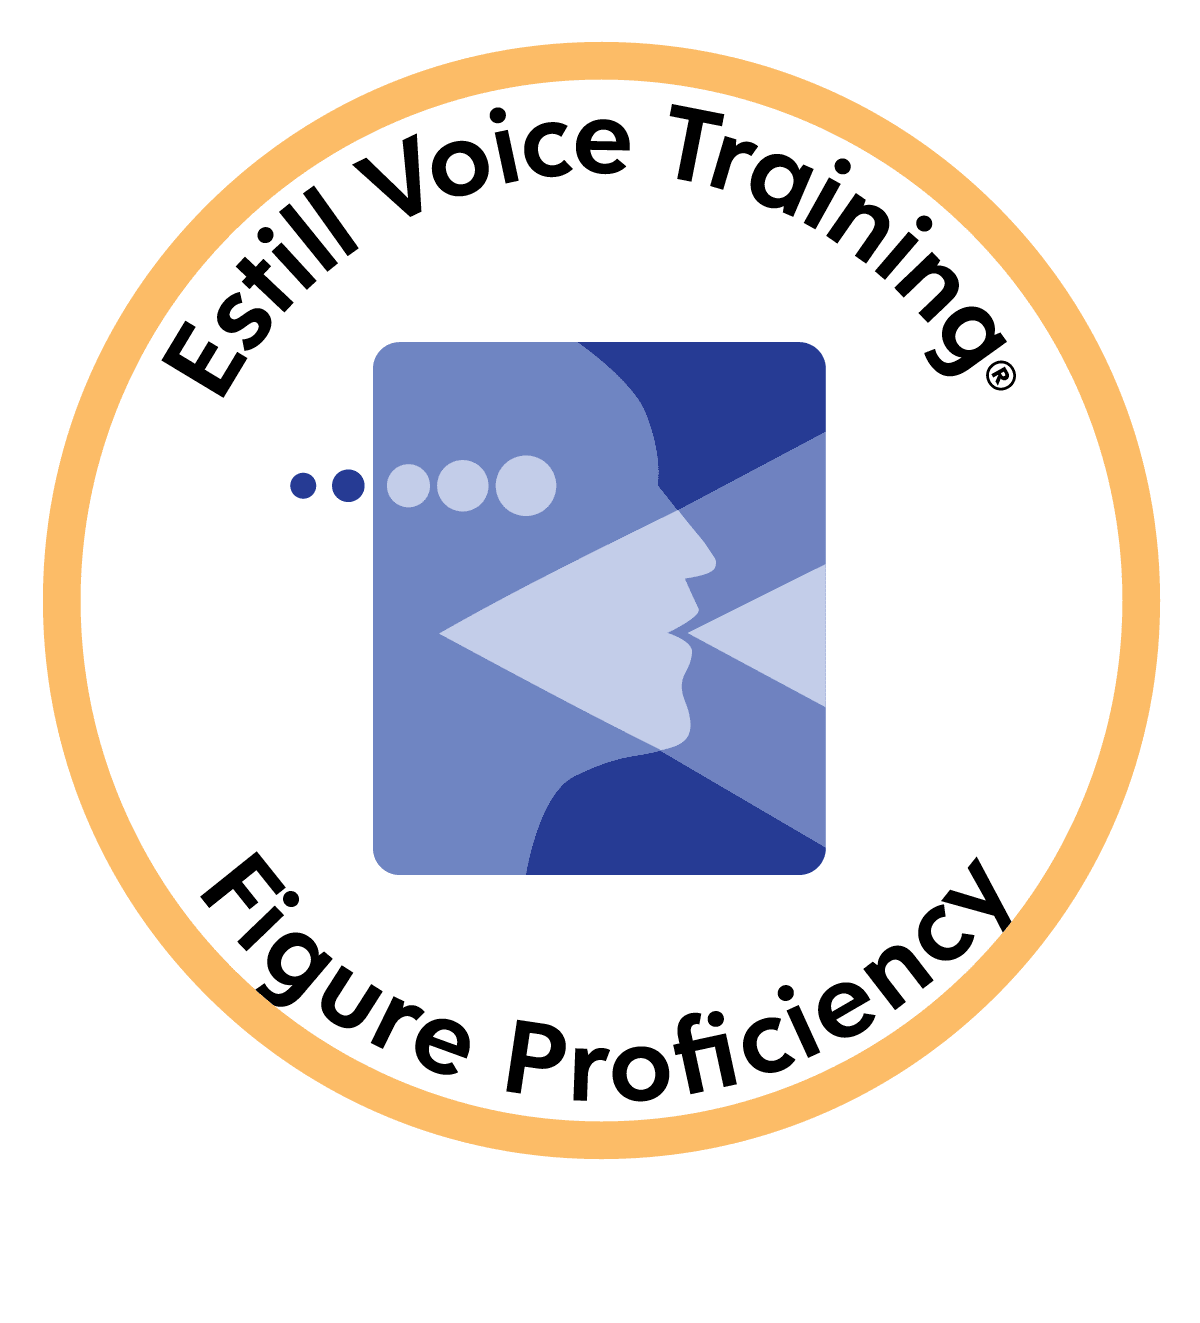 Estill Voice Training with Voice Your Potential